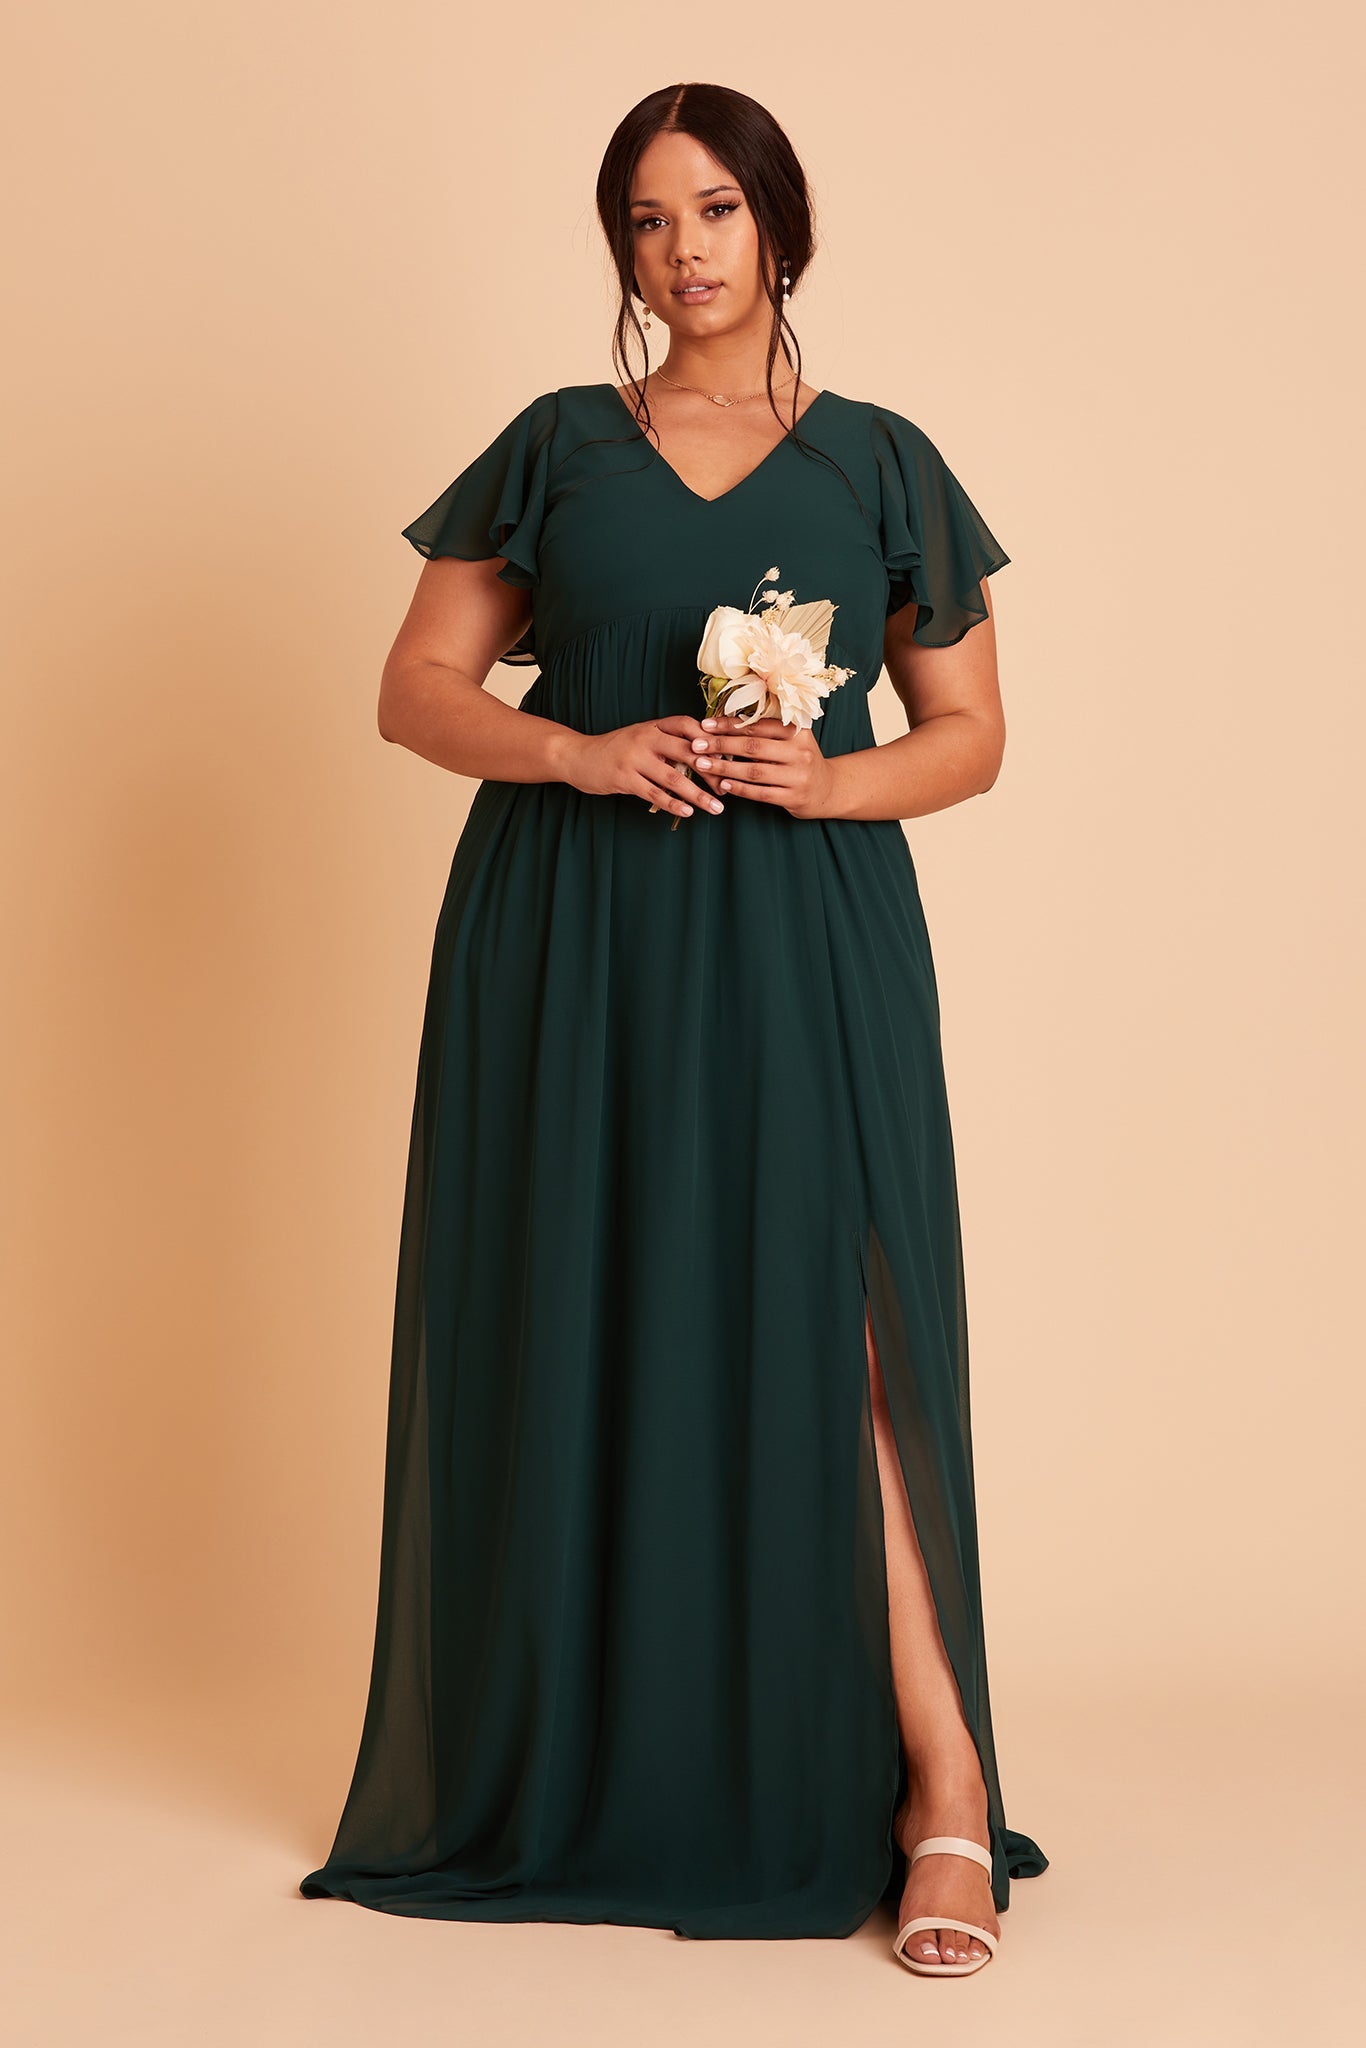 Plus Size Bridesmaid Dresses From $99 | Birdy Grey